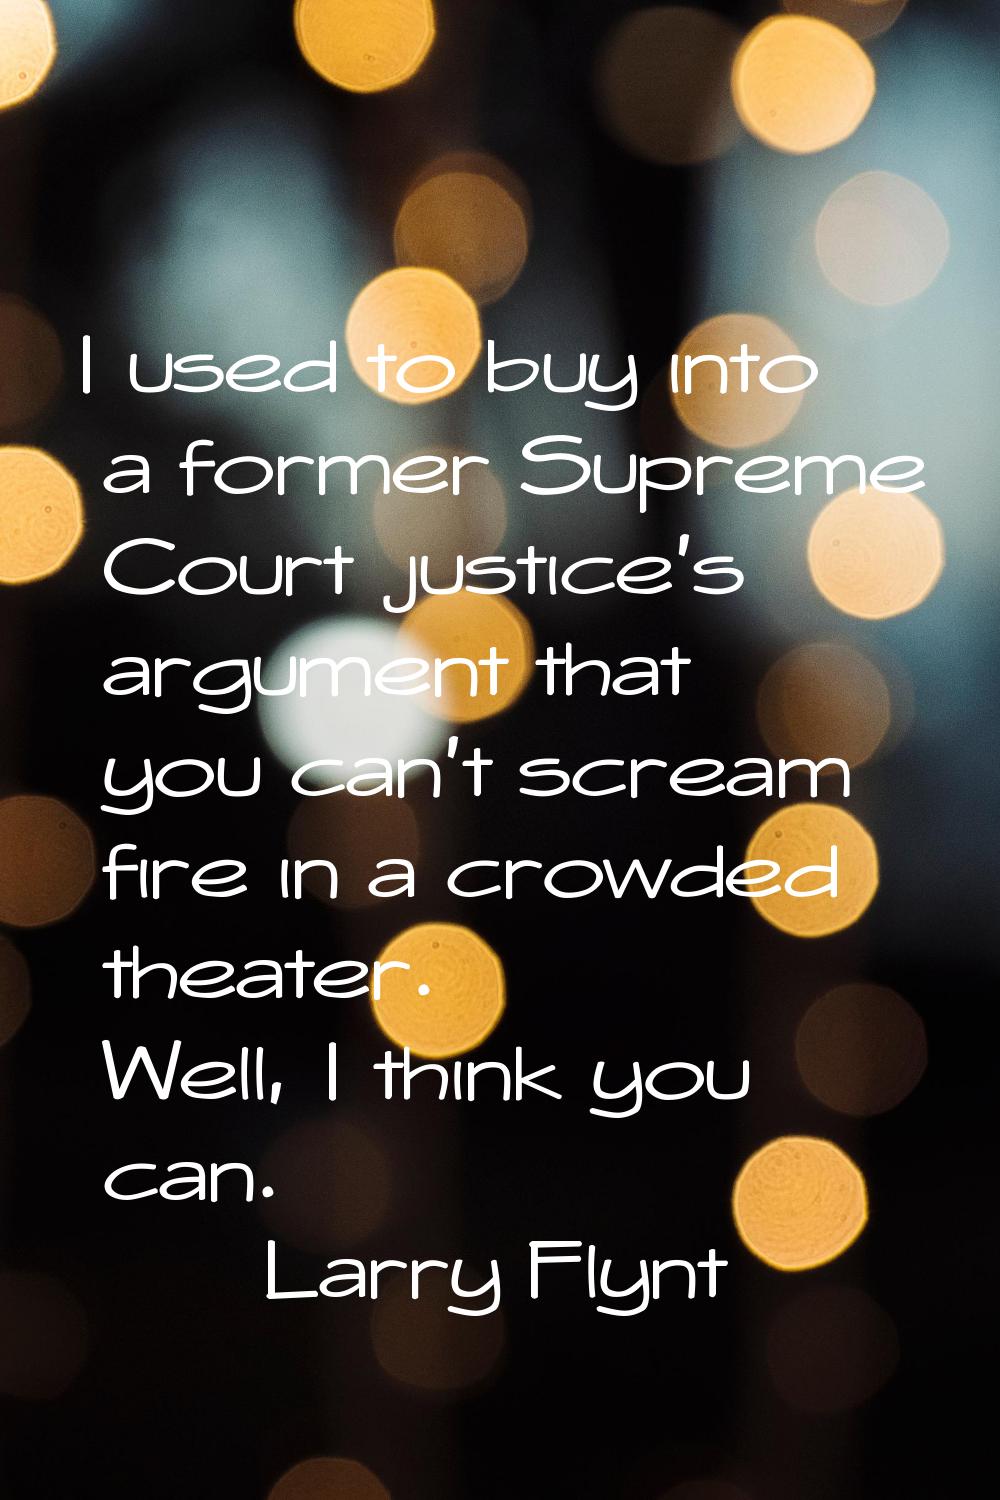 I used to buy into a former Supreme Court justice's argument that you can't scream fire in a crowde